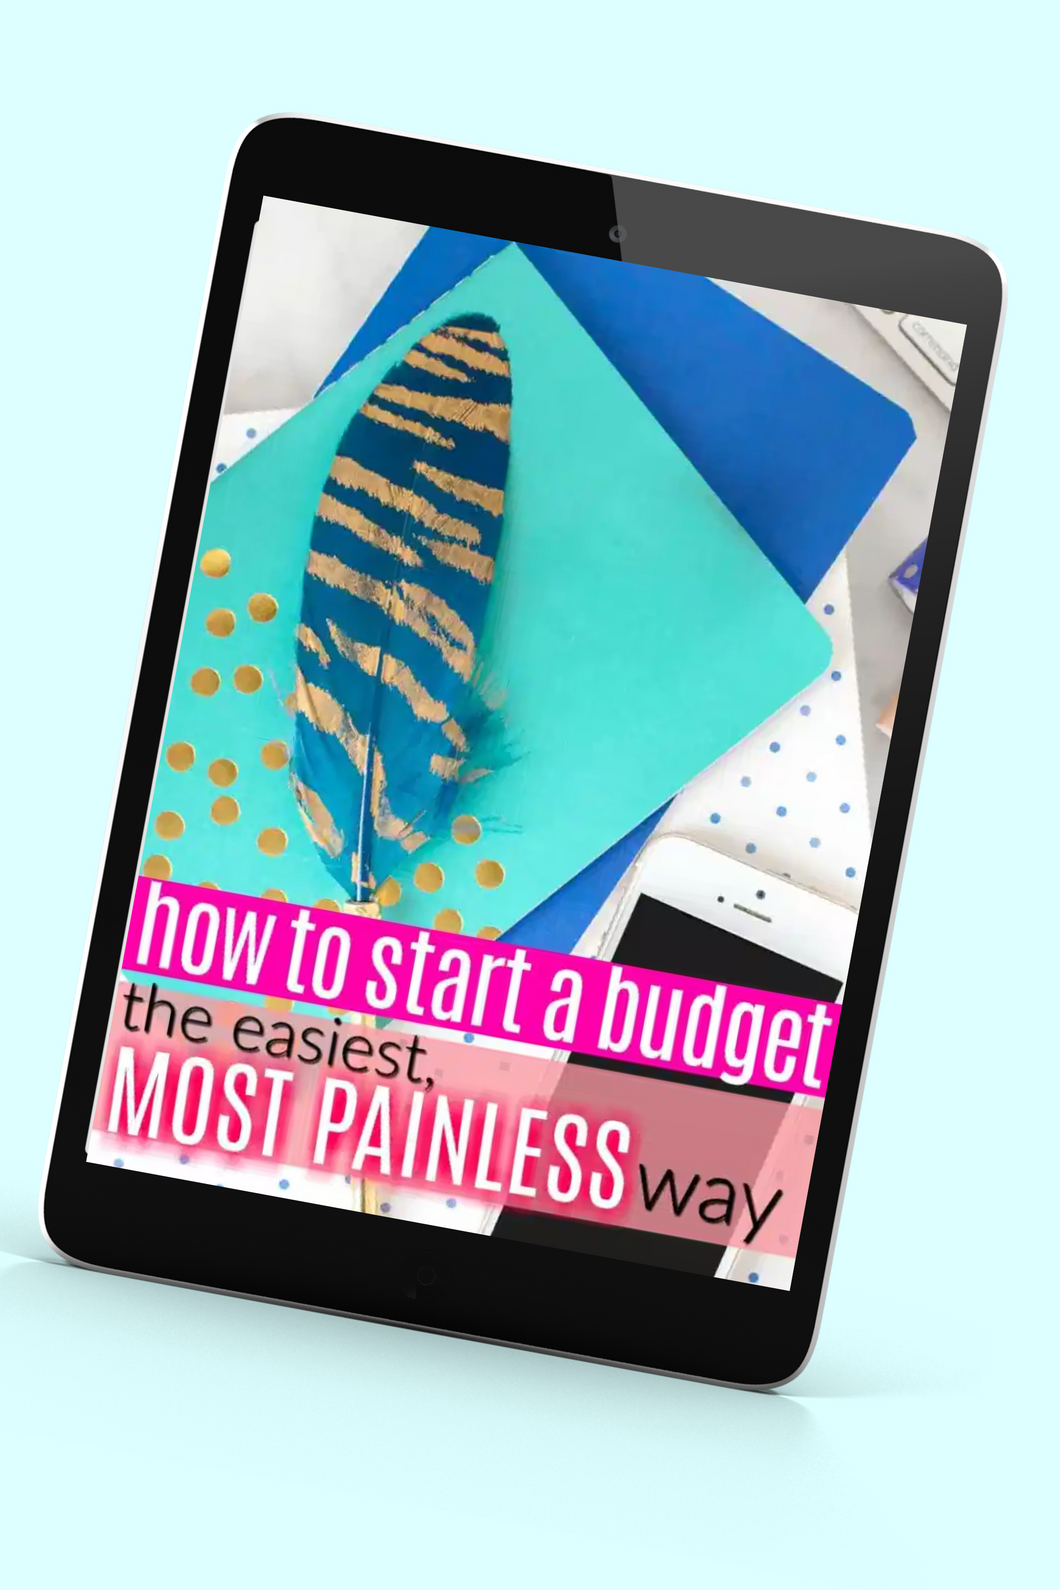 How to Start a Budget the Easy Painless Way